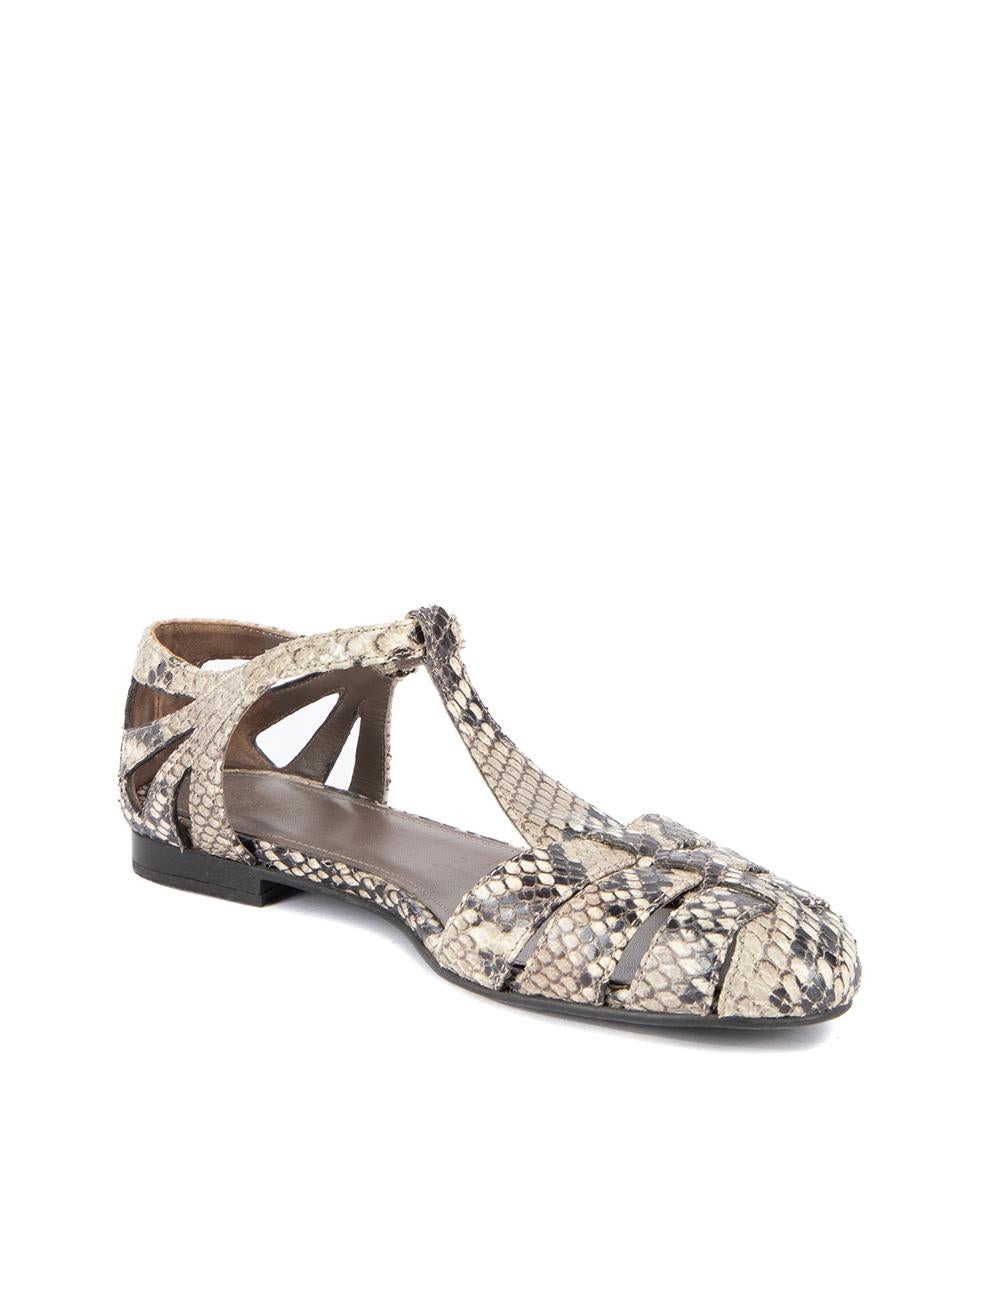 CONDITION is Very good. Minimal wear to sandals is evident. Minimal wear to the leather exterior and outsole on this used Church's designer resale item. Details Grey Snakeskin leather Sandals Flat heel Round toe Ankle strap closure Leather interior